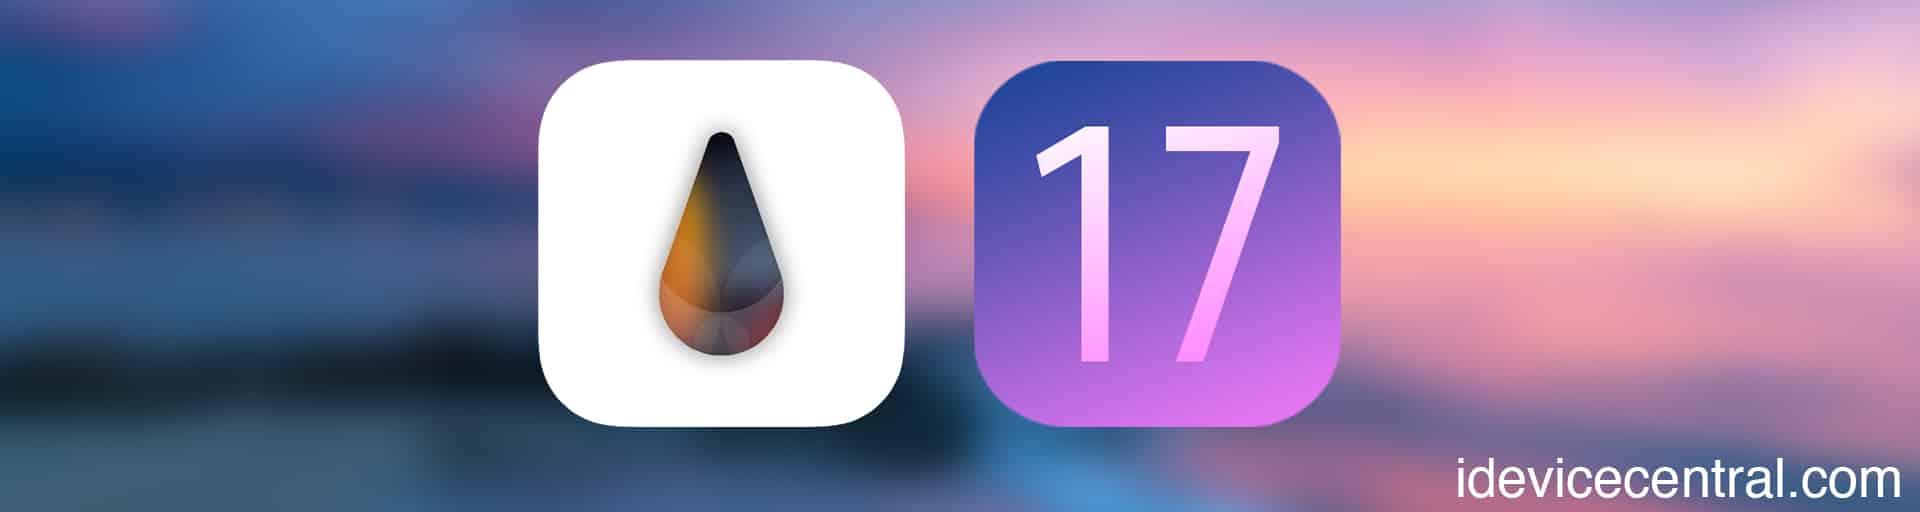 iOS 17 – 17.4.1 JAILBREAK: The Most Complete Guide